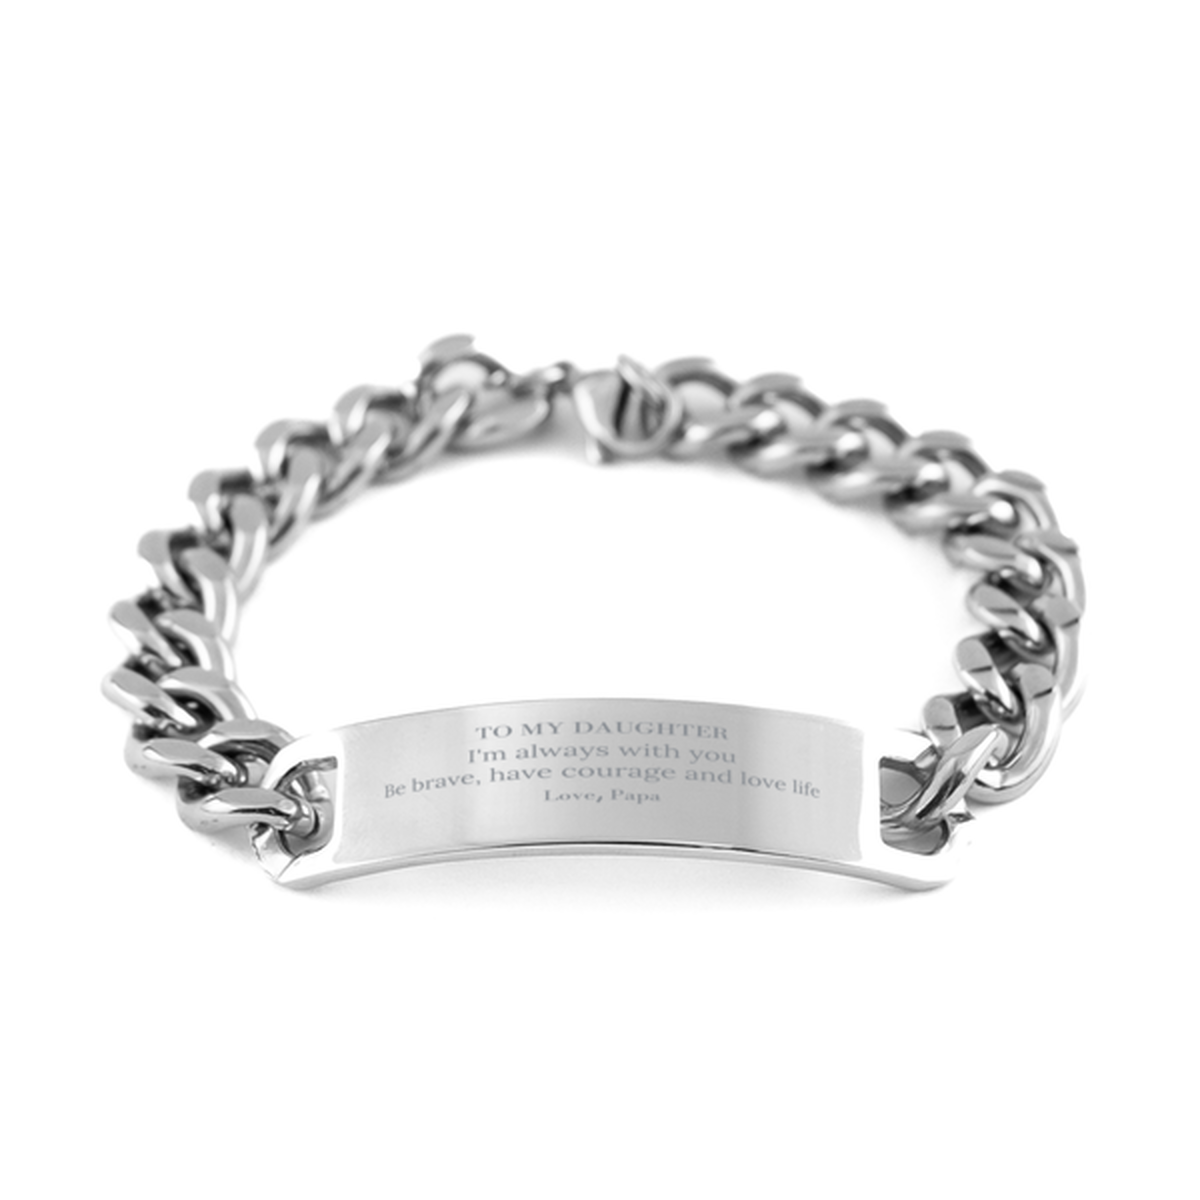 To My Daughter Gifts from Papa, Unique Cuban Chain Stainless Steel Bracelet Inspirational Christmas Birthday Graduation Gifts for Daughter I'm always with you. Be brave, have courage and love life. Love, Papa